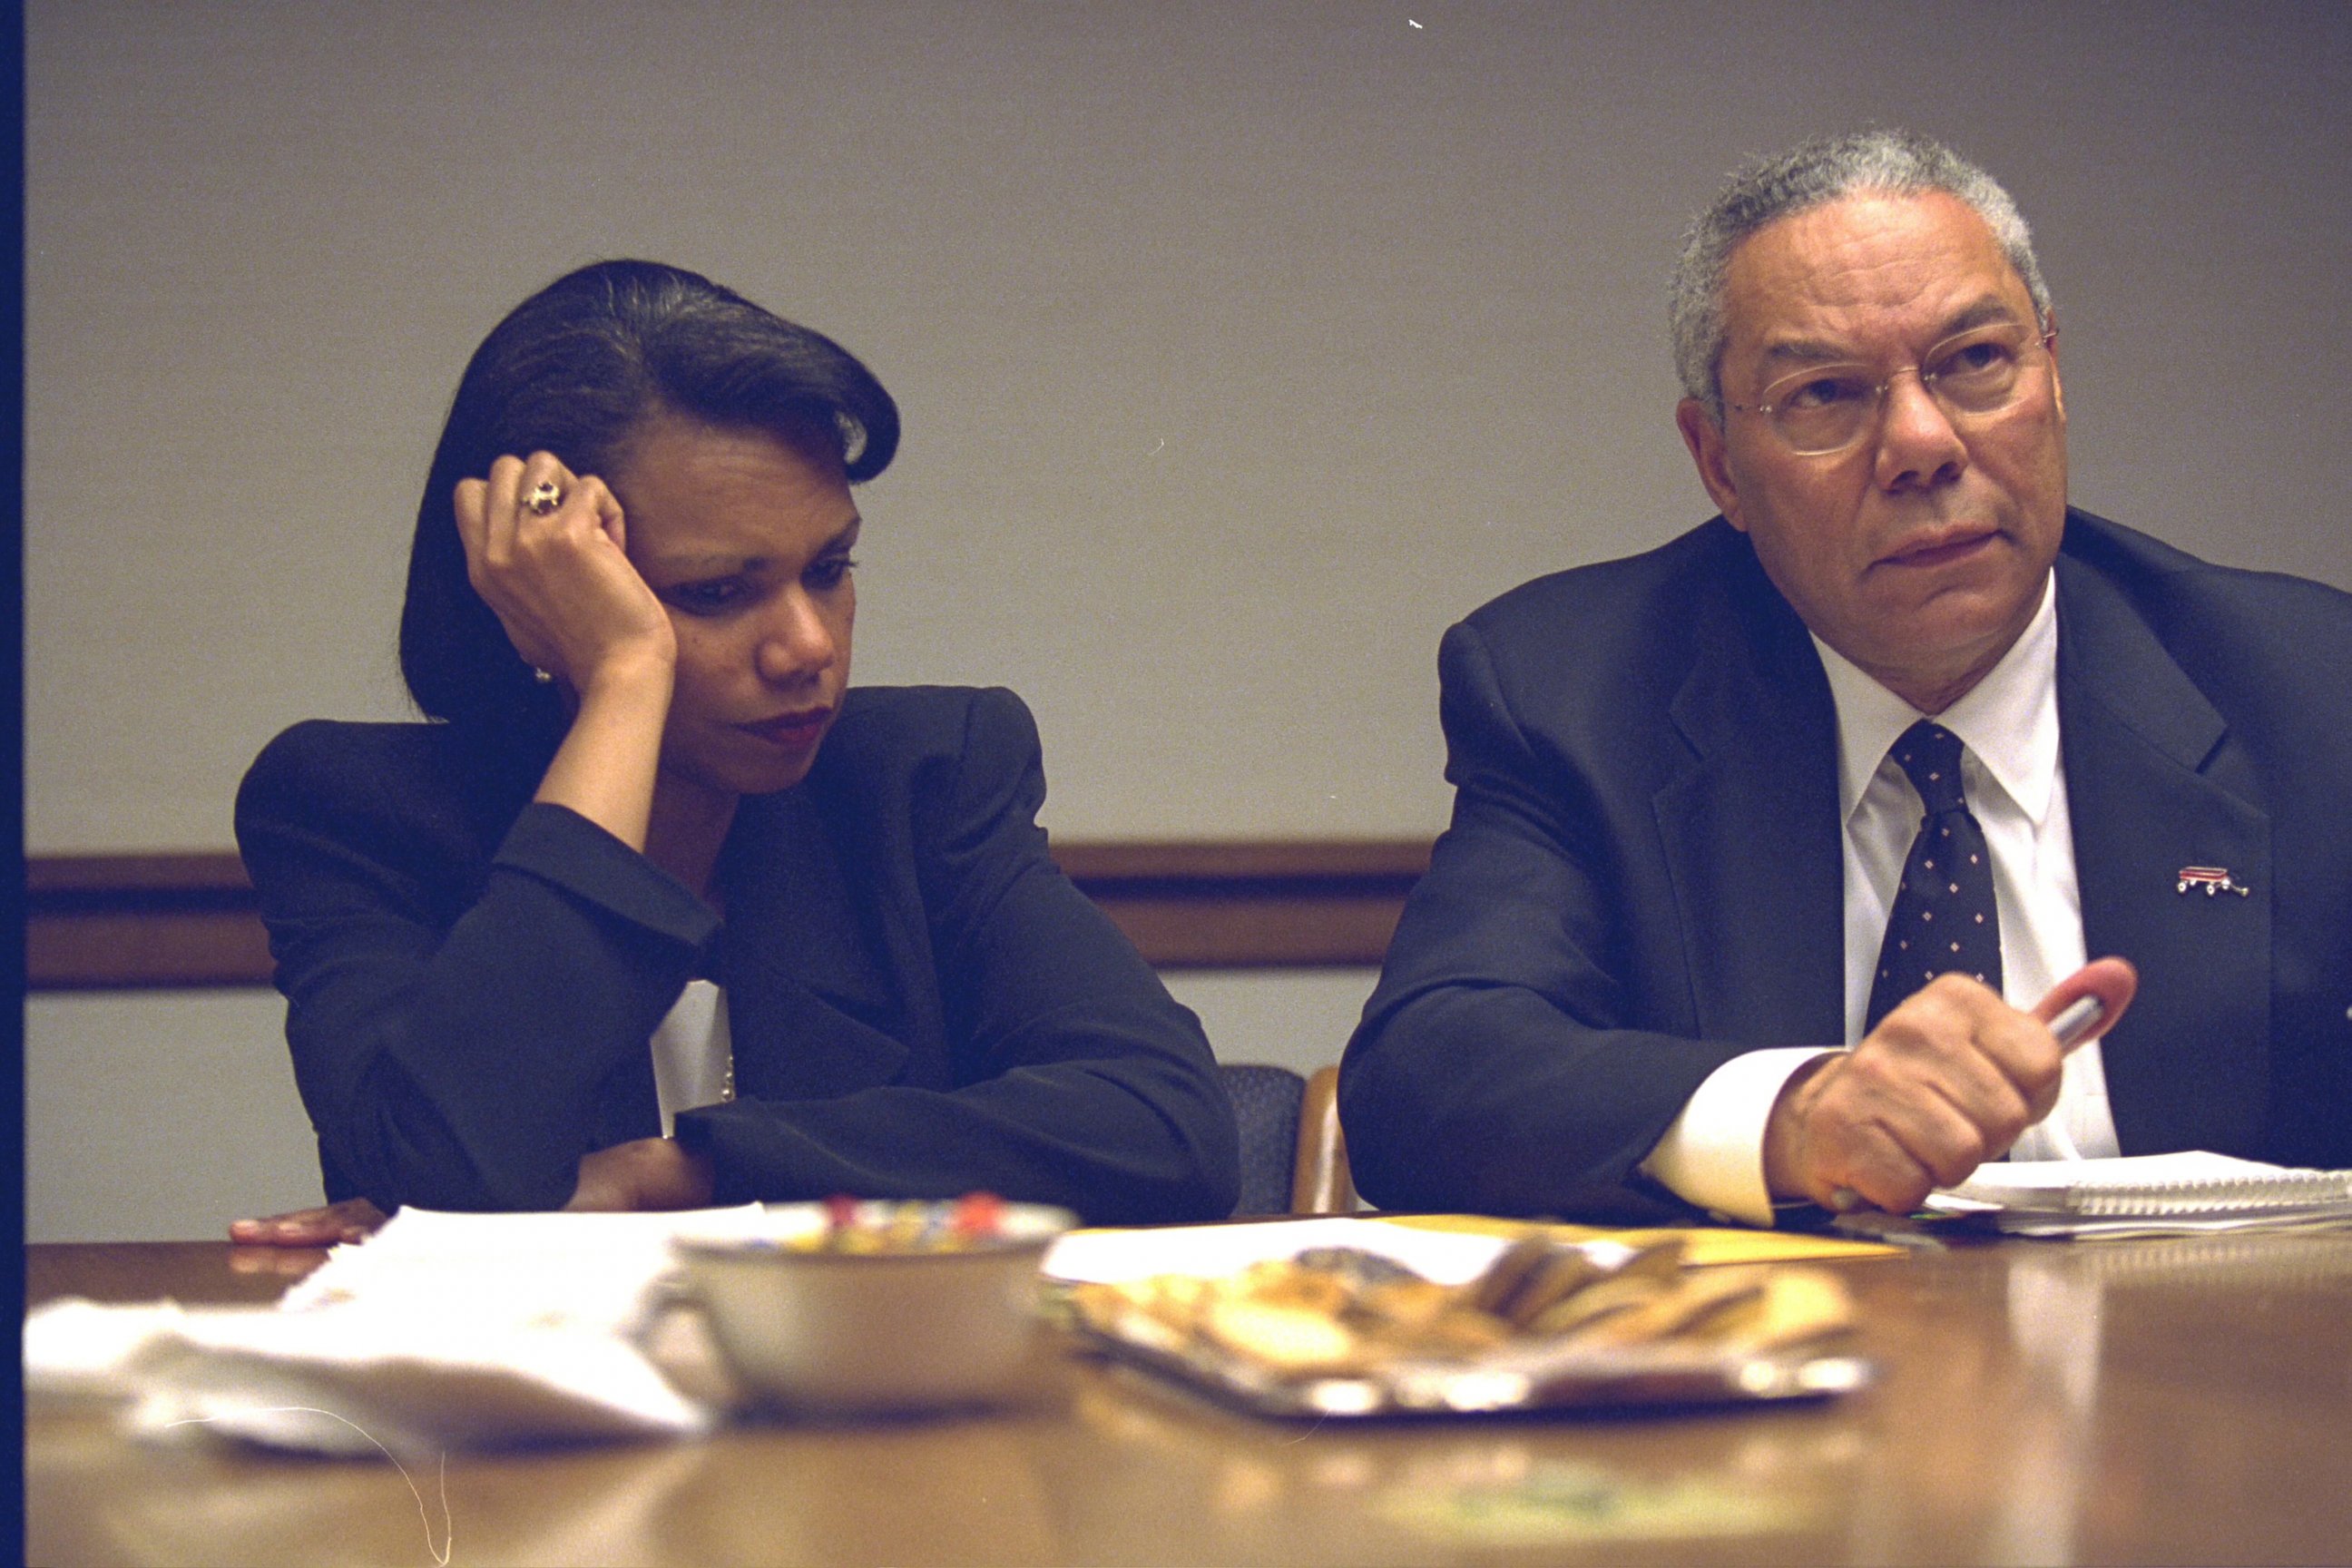 PHOTO: This photo released by the U.S. National Archives shows National Security Advisor Condoleezza Rice and Secretary of State Colin Powell at the President's Emergency Operations Center on Sept. 11, 2001.